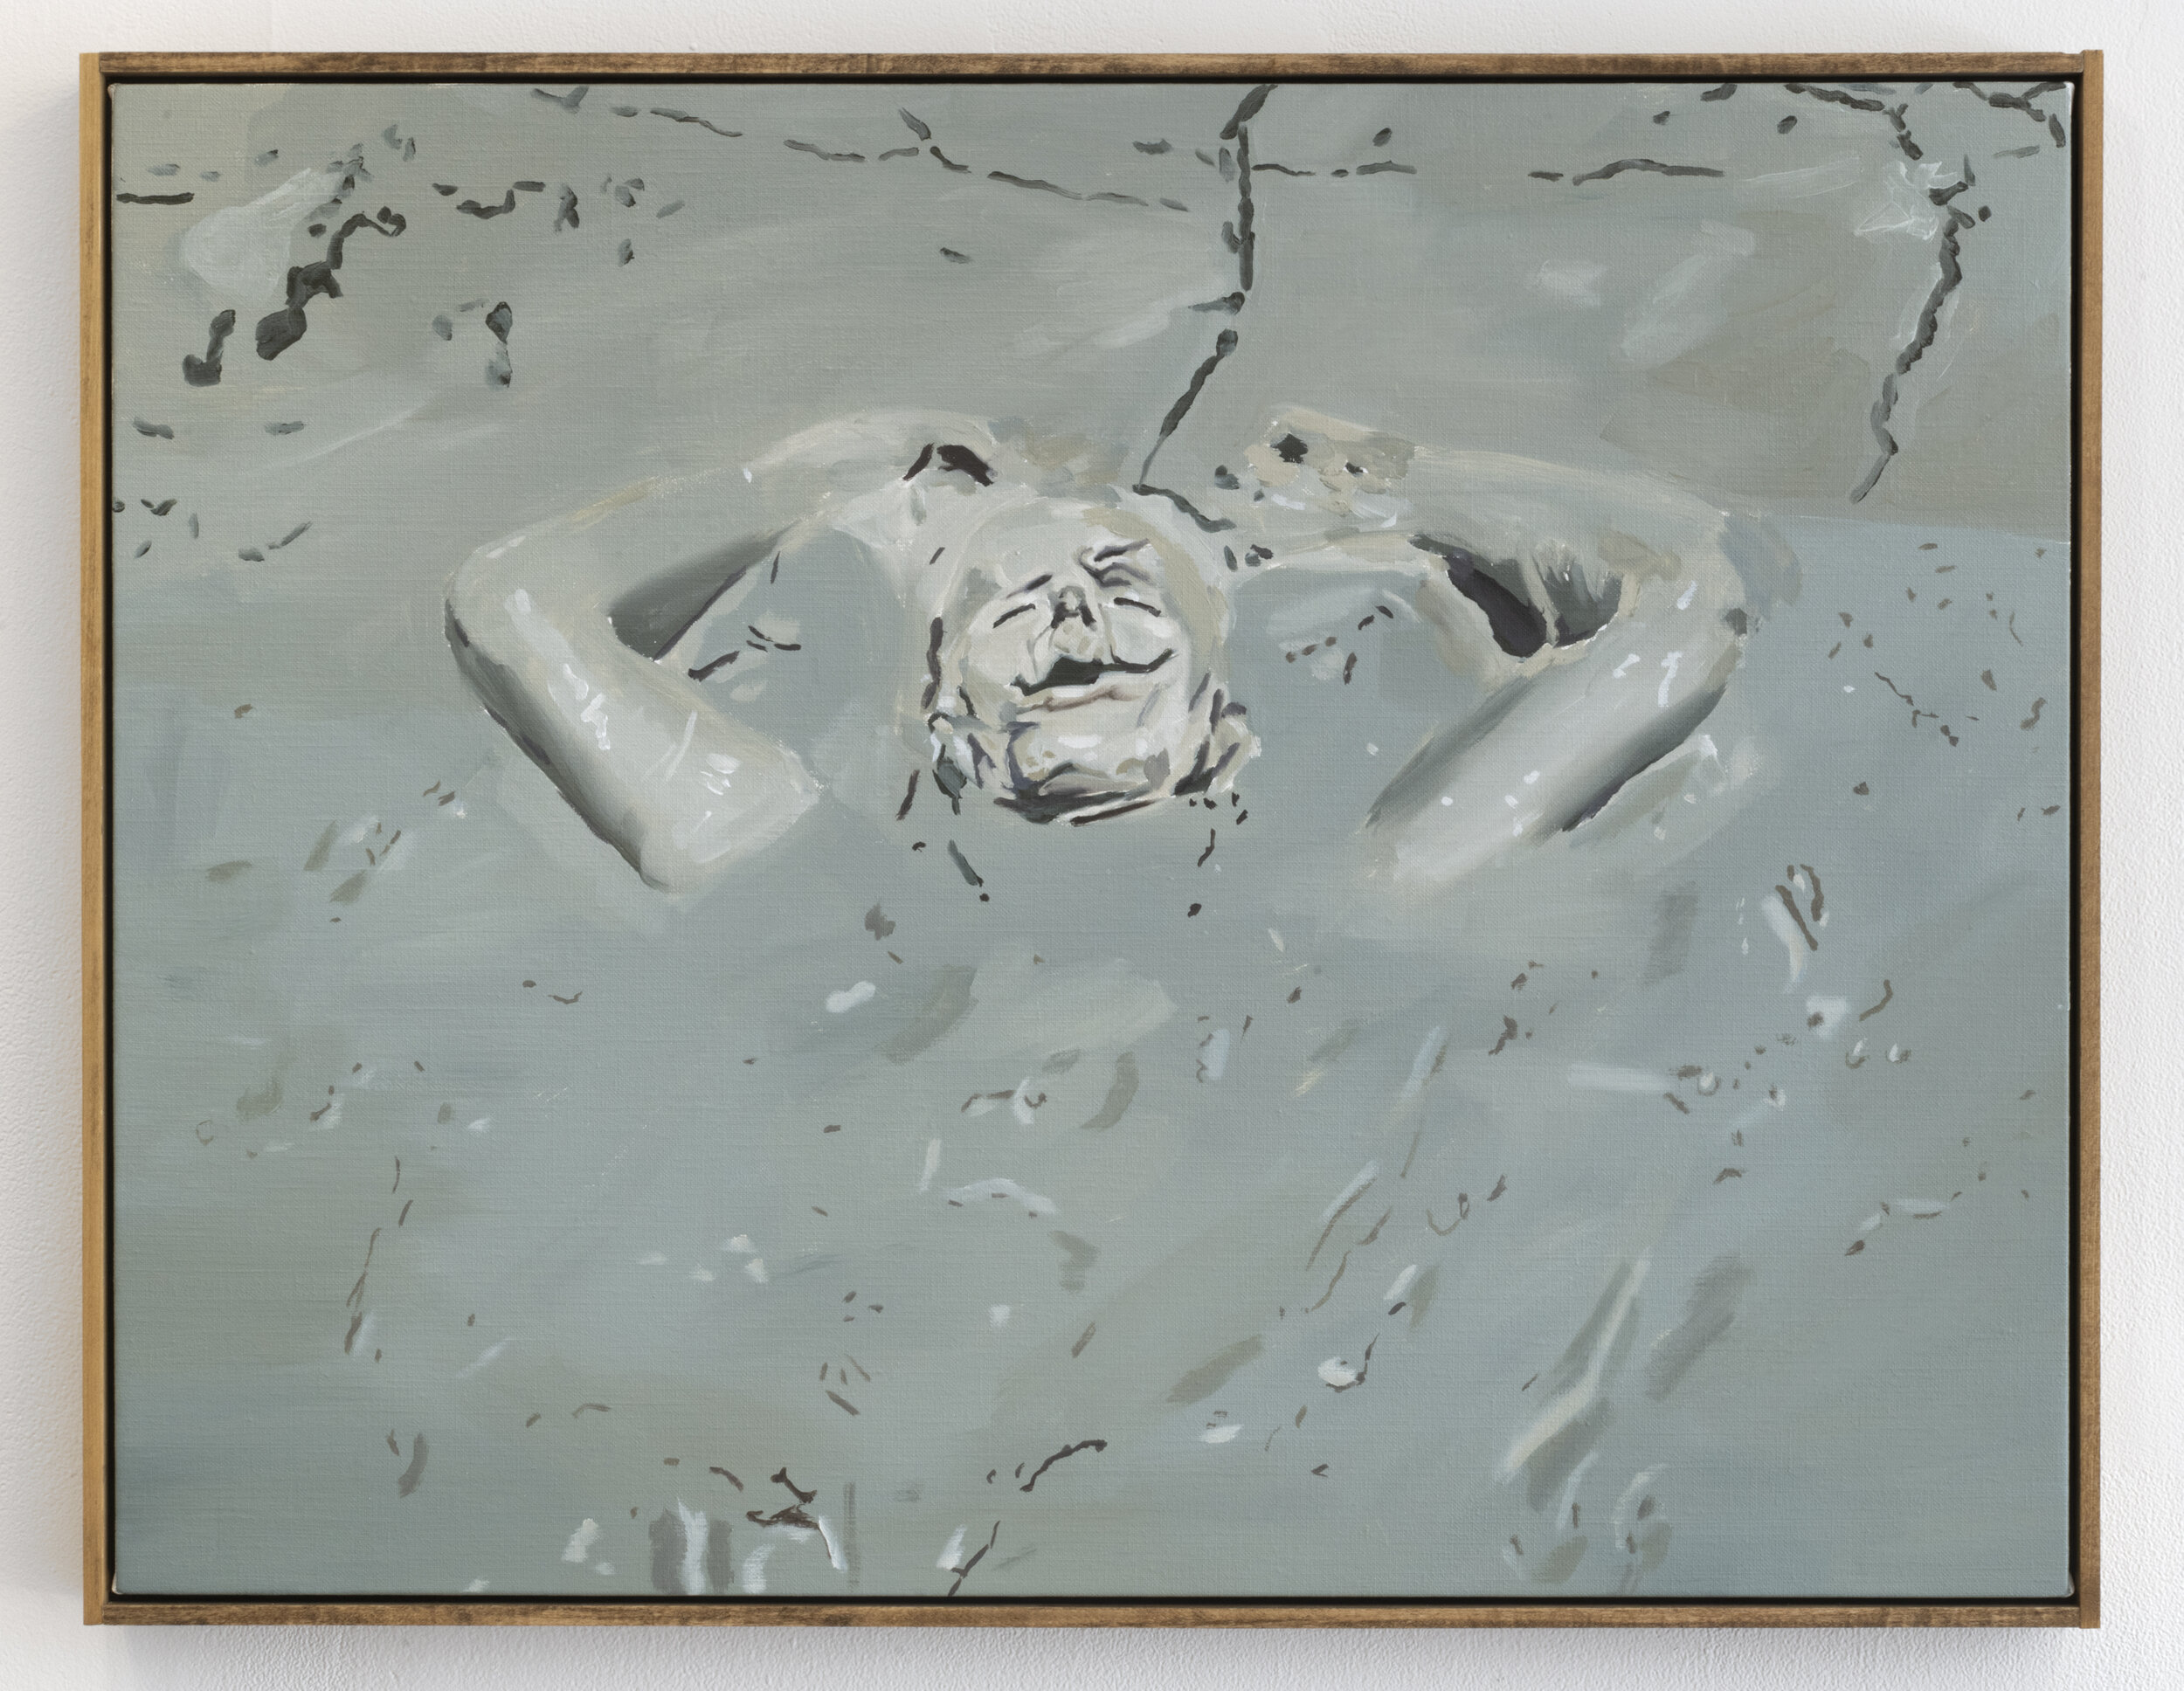   Shower me when the war’s over  2021 Oil on linen, wood frame 26 x 33 inches 